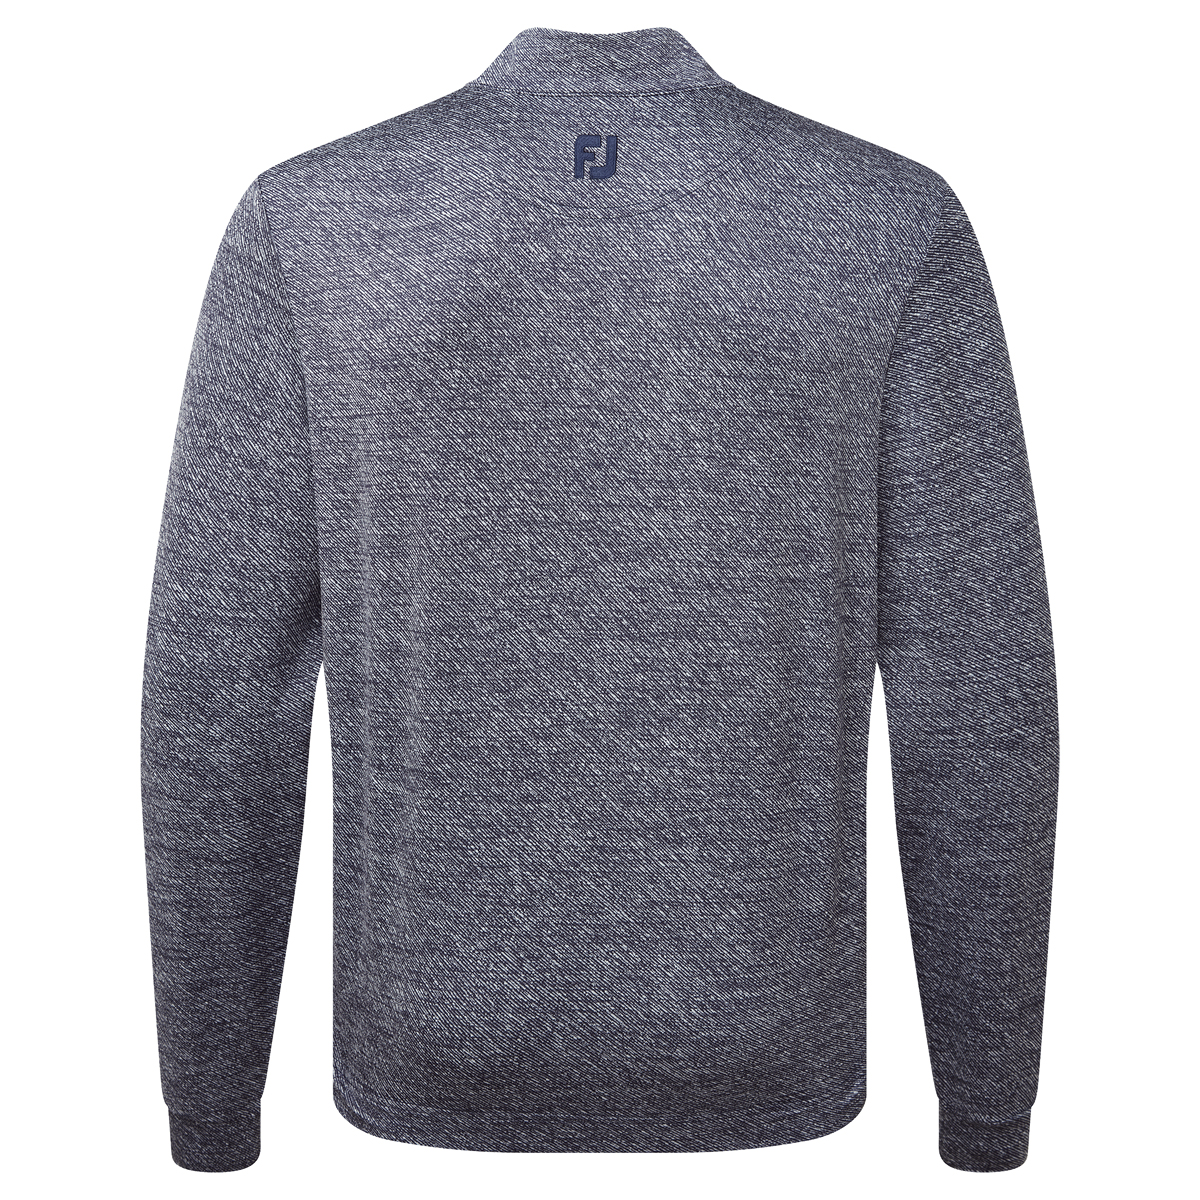 FootJoy EU Jacquard Texture Chill-Out Mens Golf Pullover  - Navy